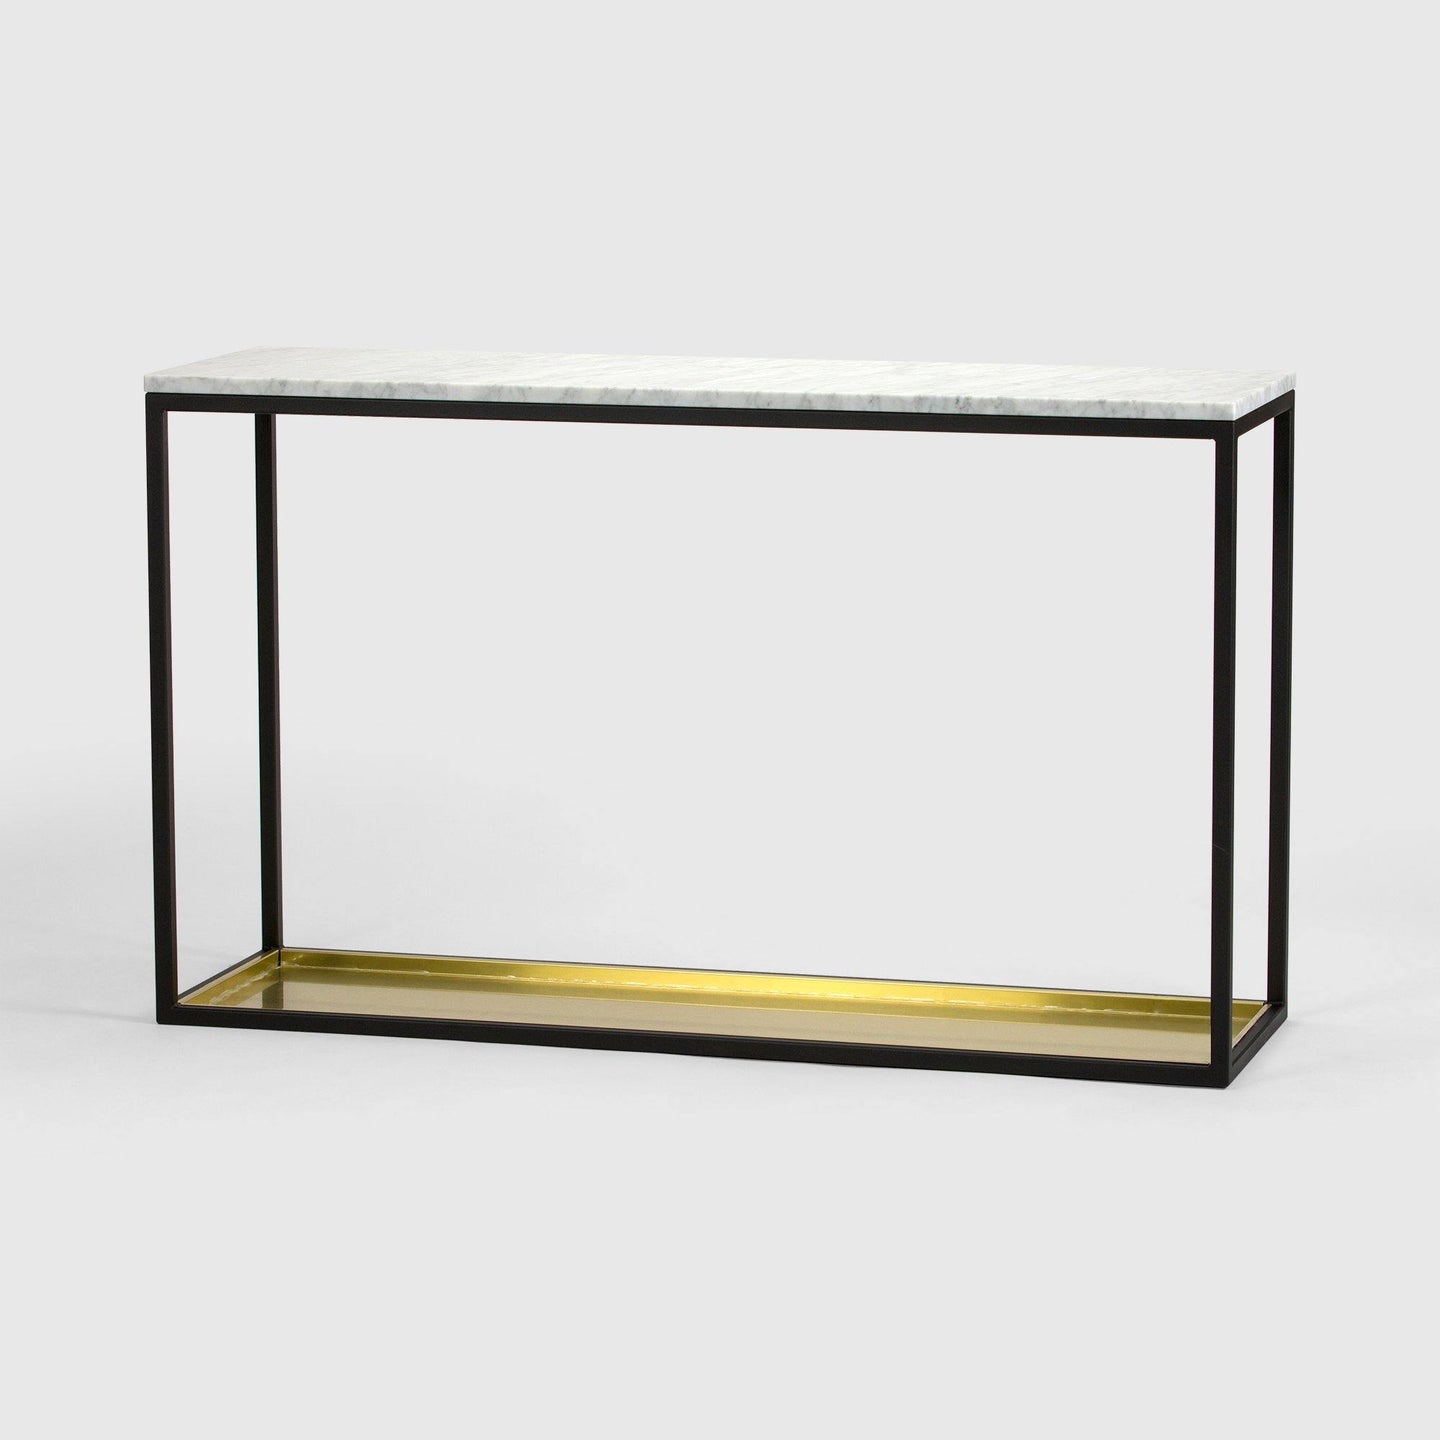 Console Table 11 One level, Black, Brass, Carrara Marble, Scherlin Form, image